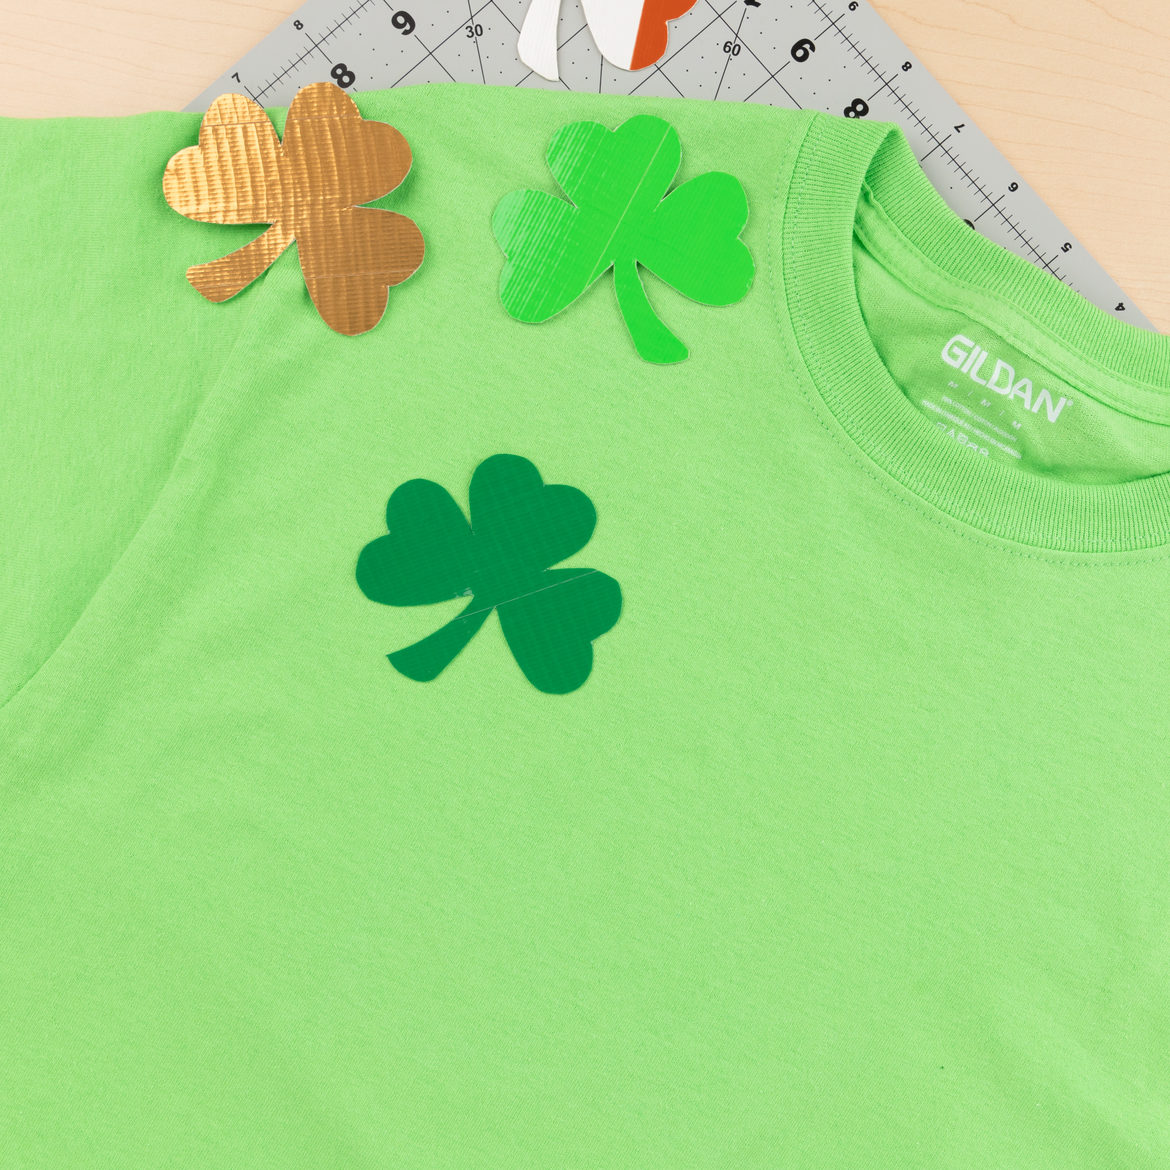 peel away the wax paper and apply the shamrock to shirts